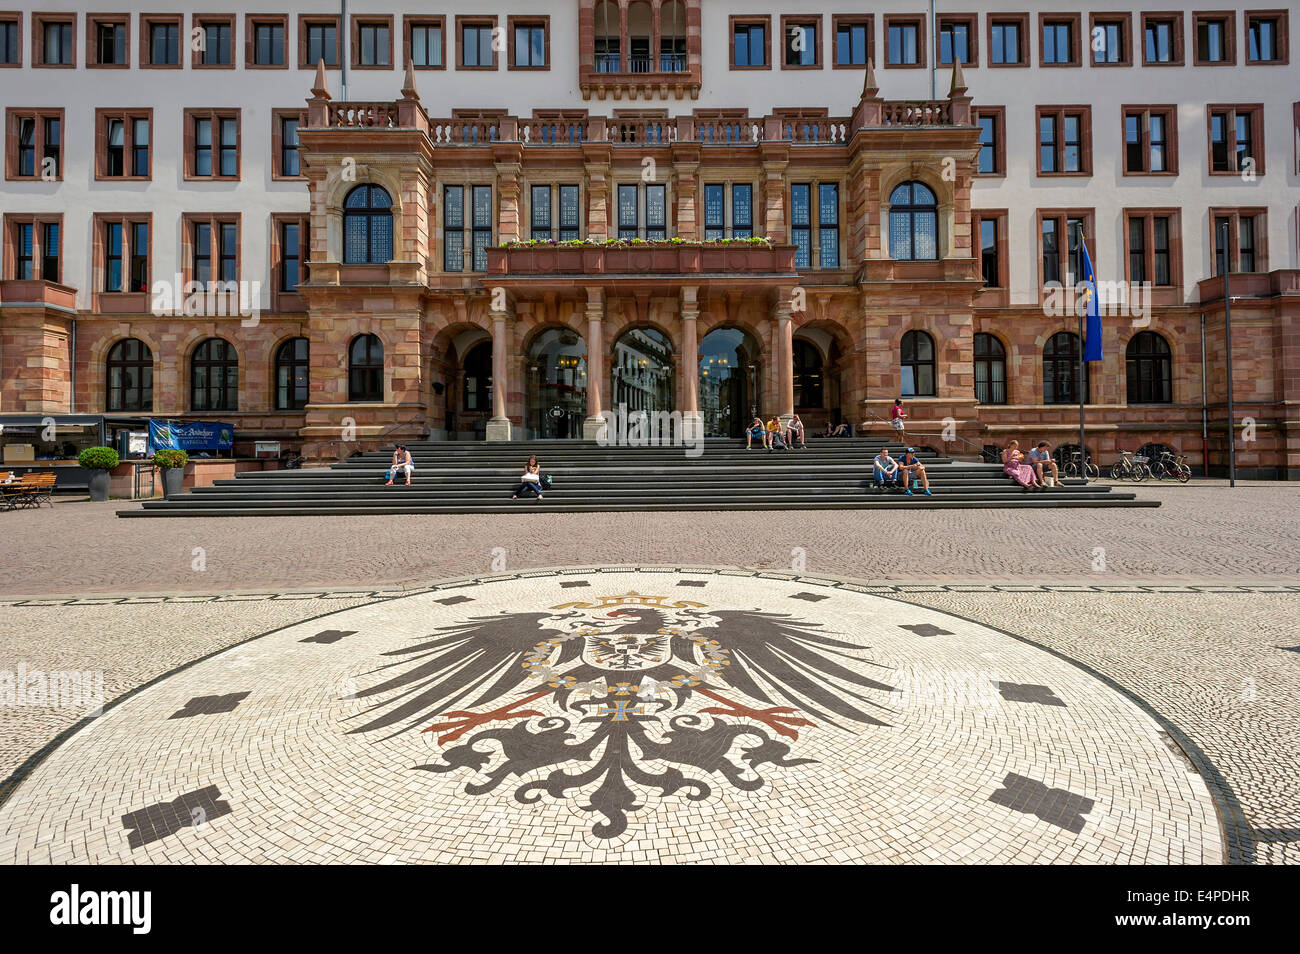 Mosaic, imperial eagle of the German Empire from 1888 on, Wappeninsel, New Town Hall, Schlossplatz square, Wiesbaden, Hesse Stock Photo